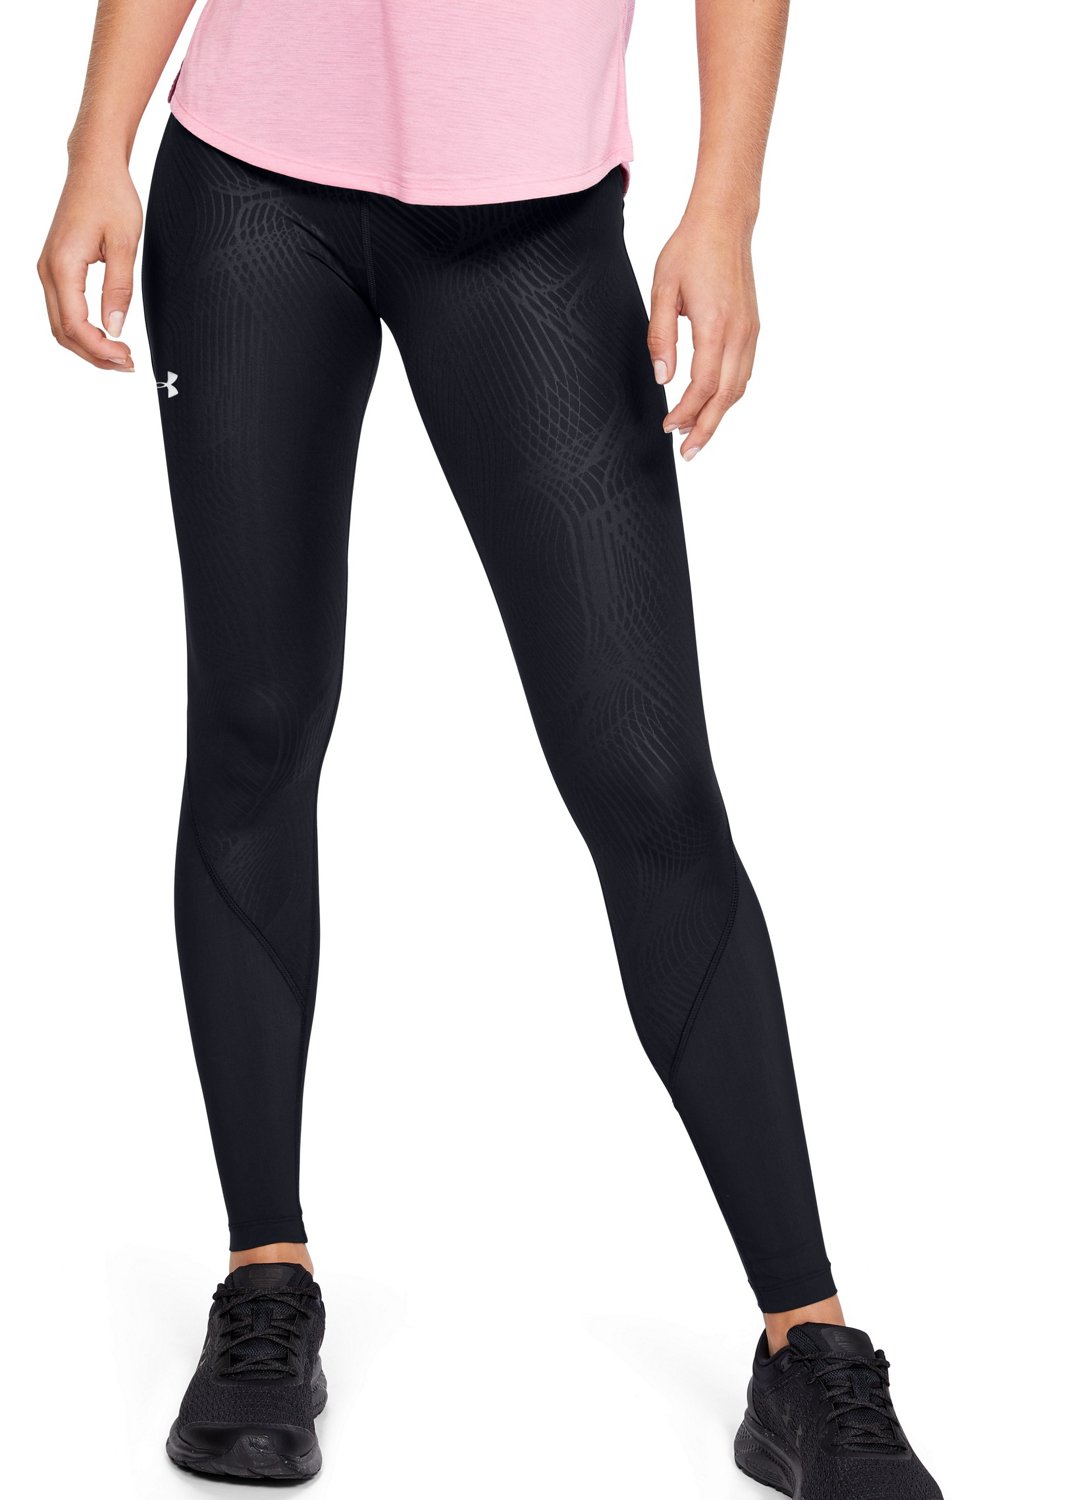 under armour running tights womens